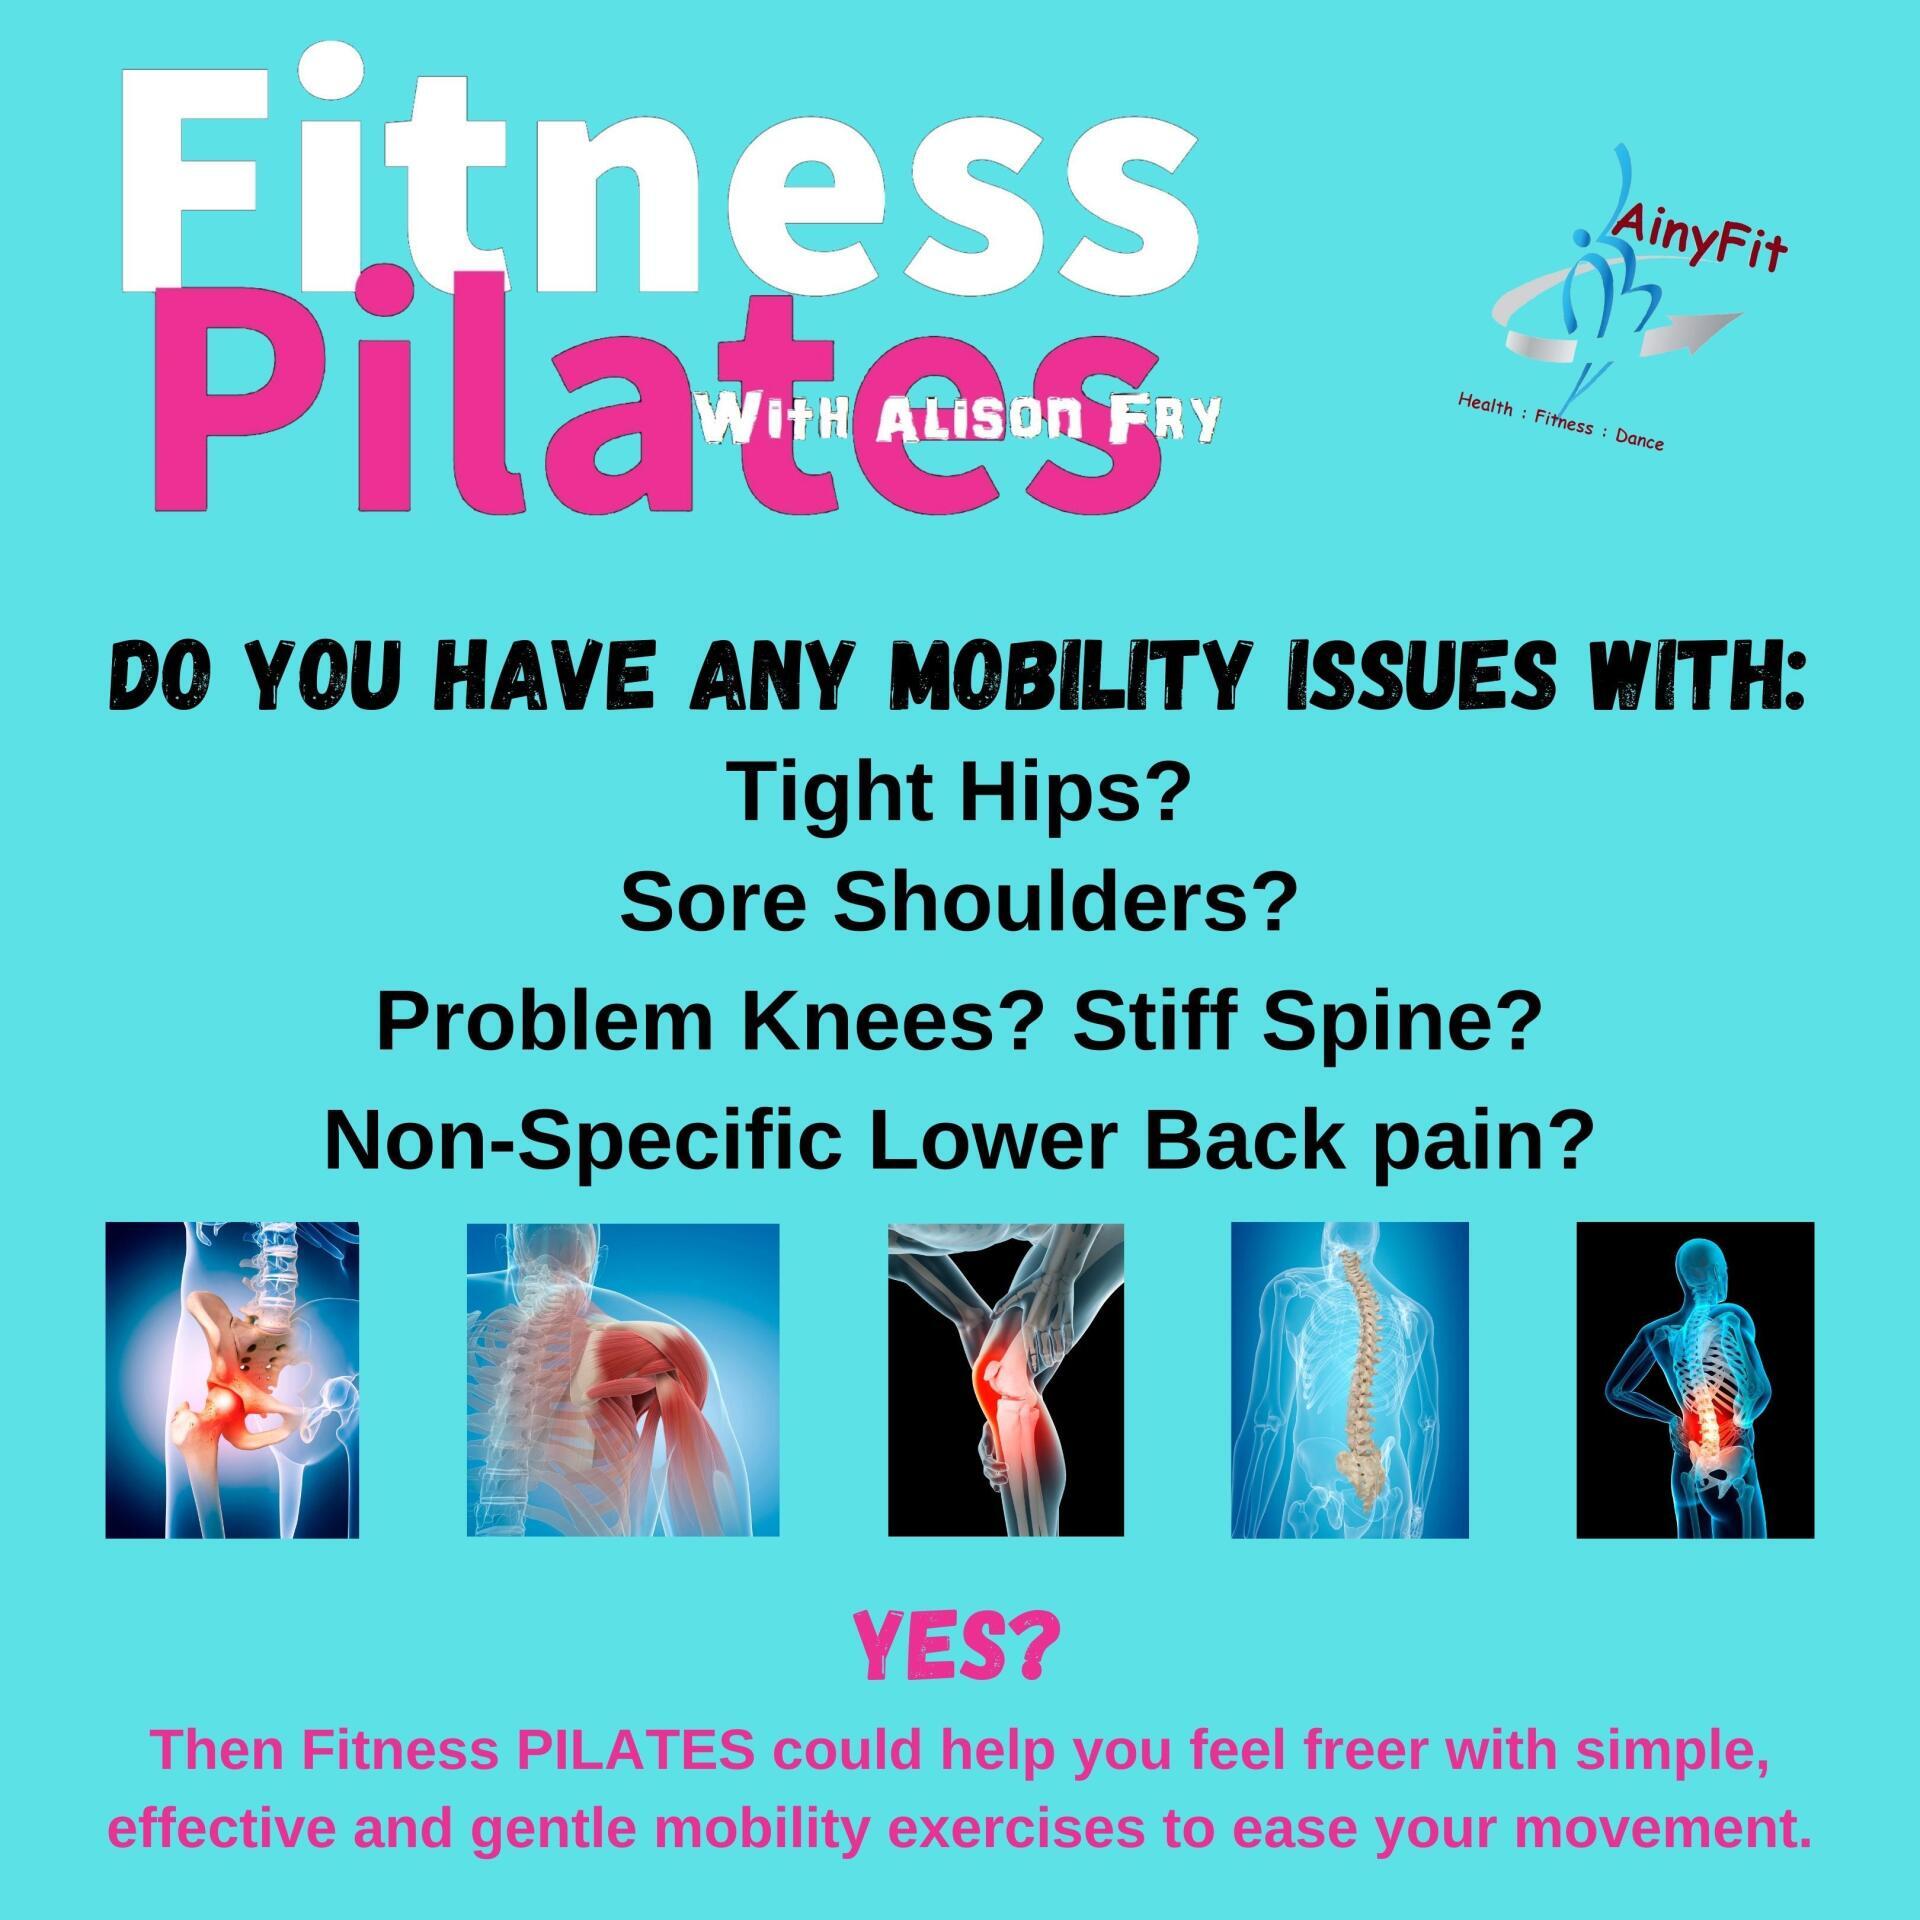 Do you have Mobility issues with tight hips, sore shoulders, problem knees, stiff spine?